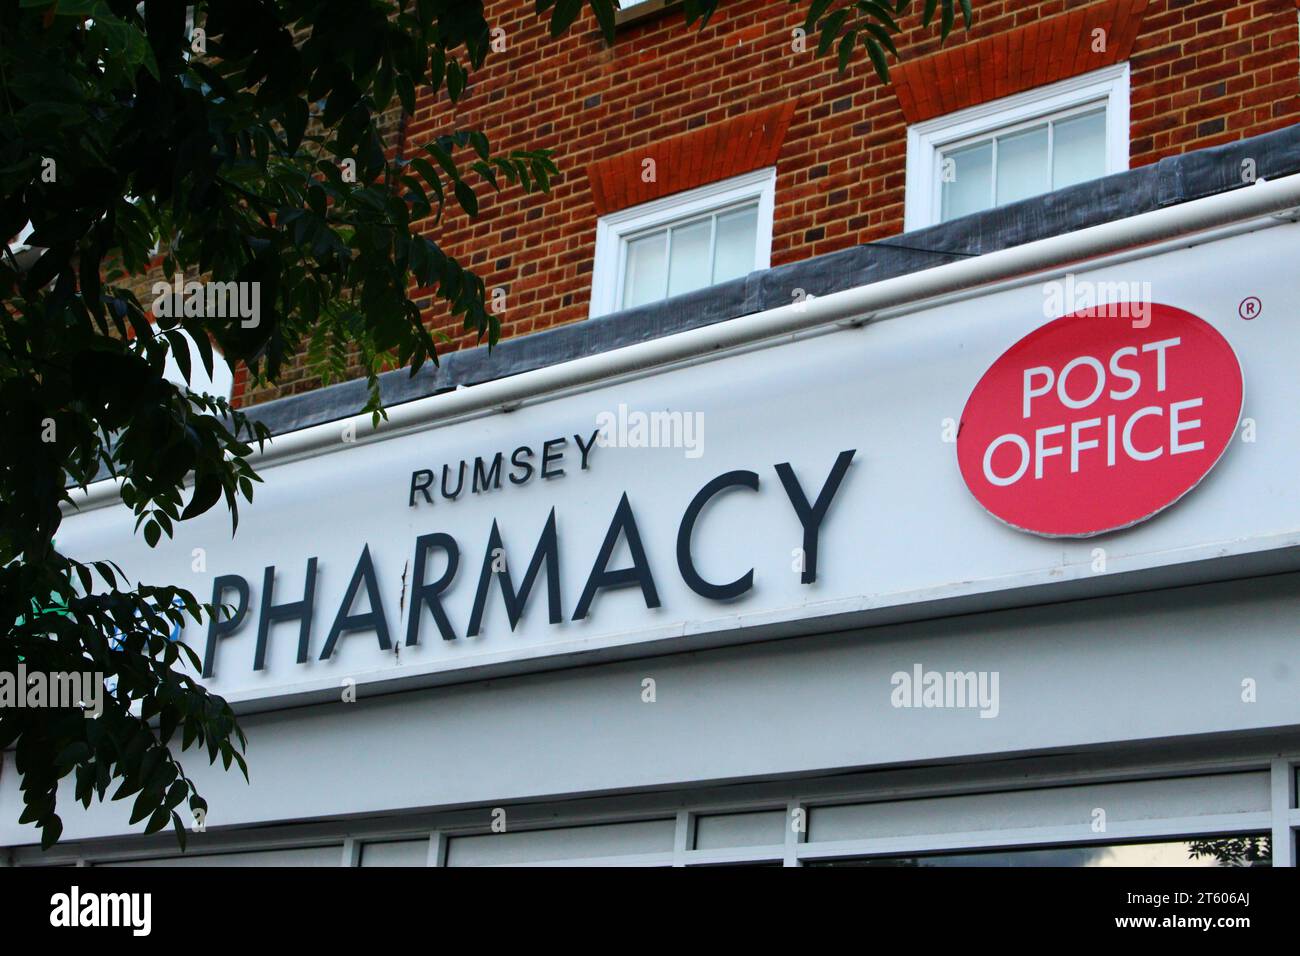 Rumsey Pharmacy and Post Office - Dulwich Village Stock Photo